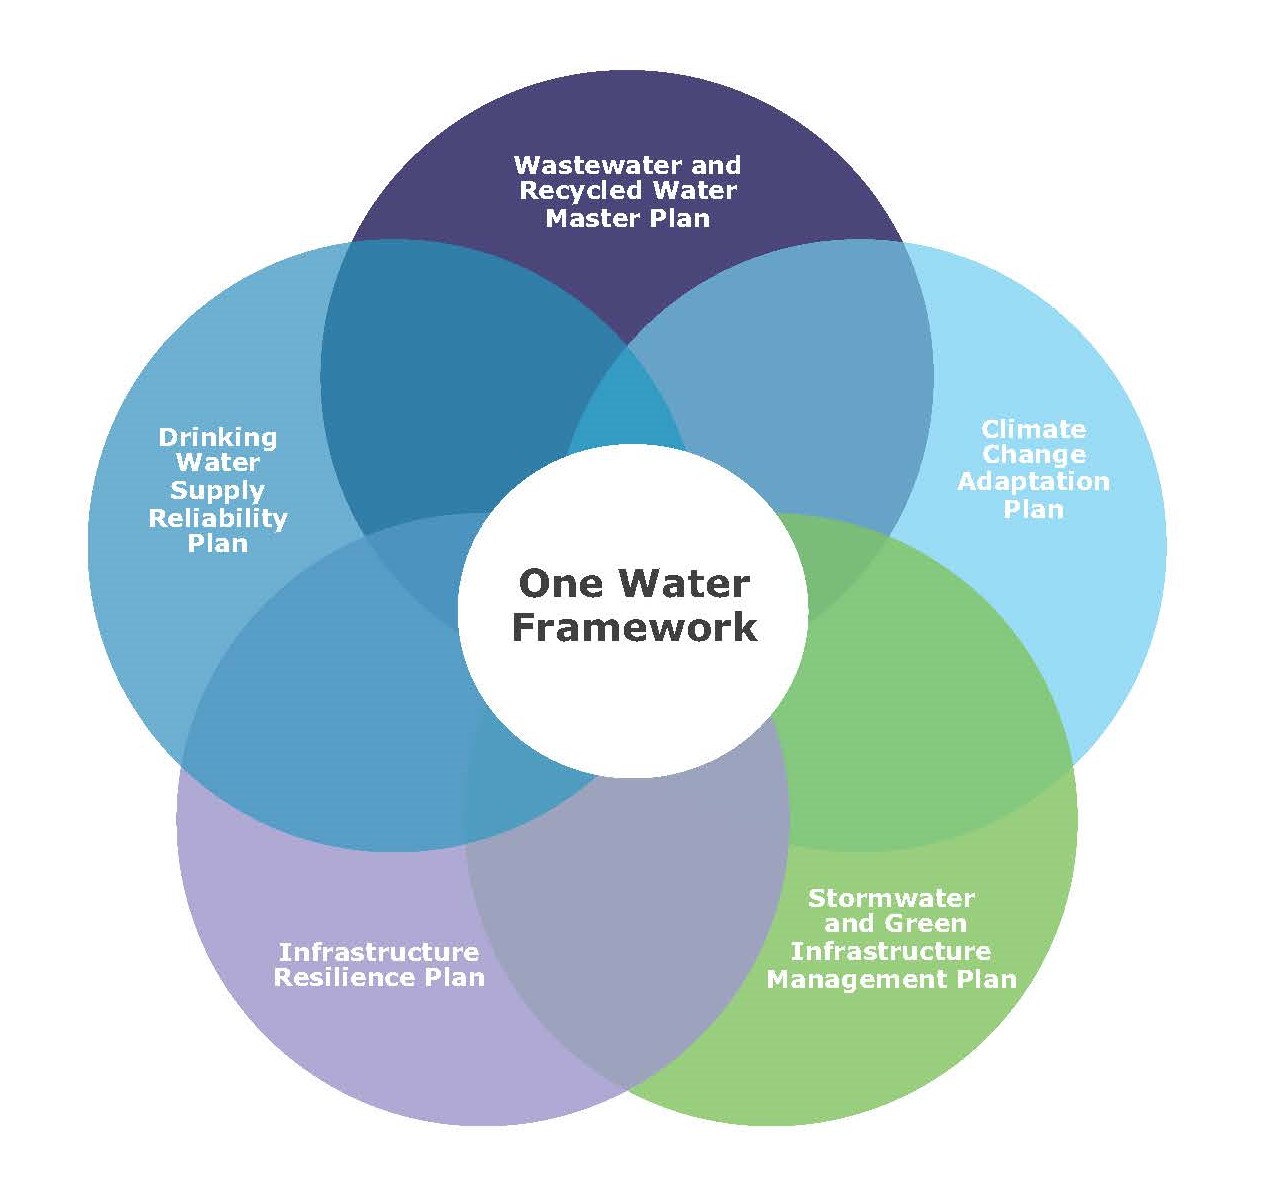 research topics in water supply